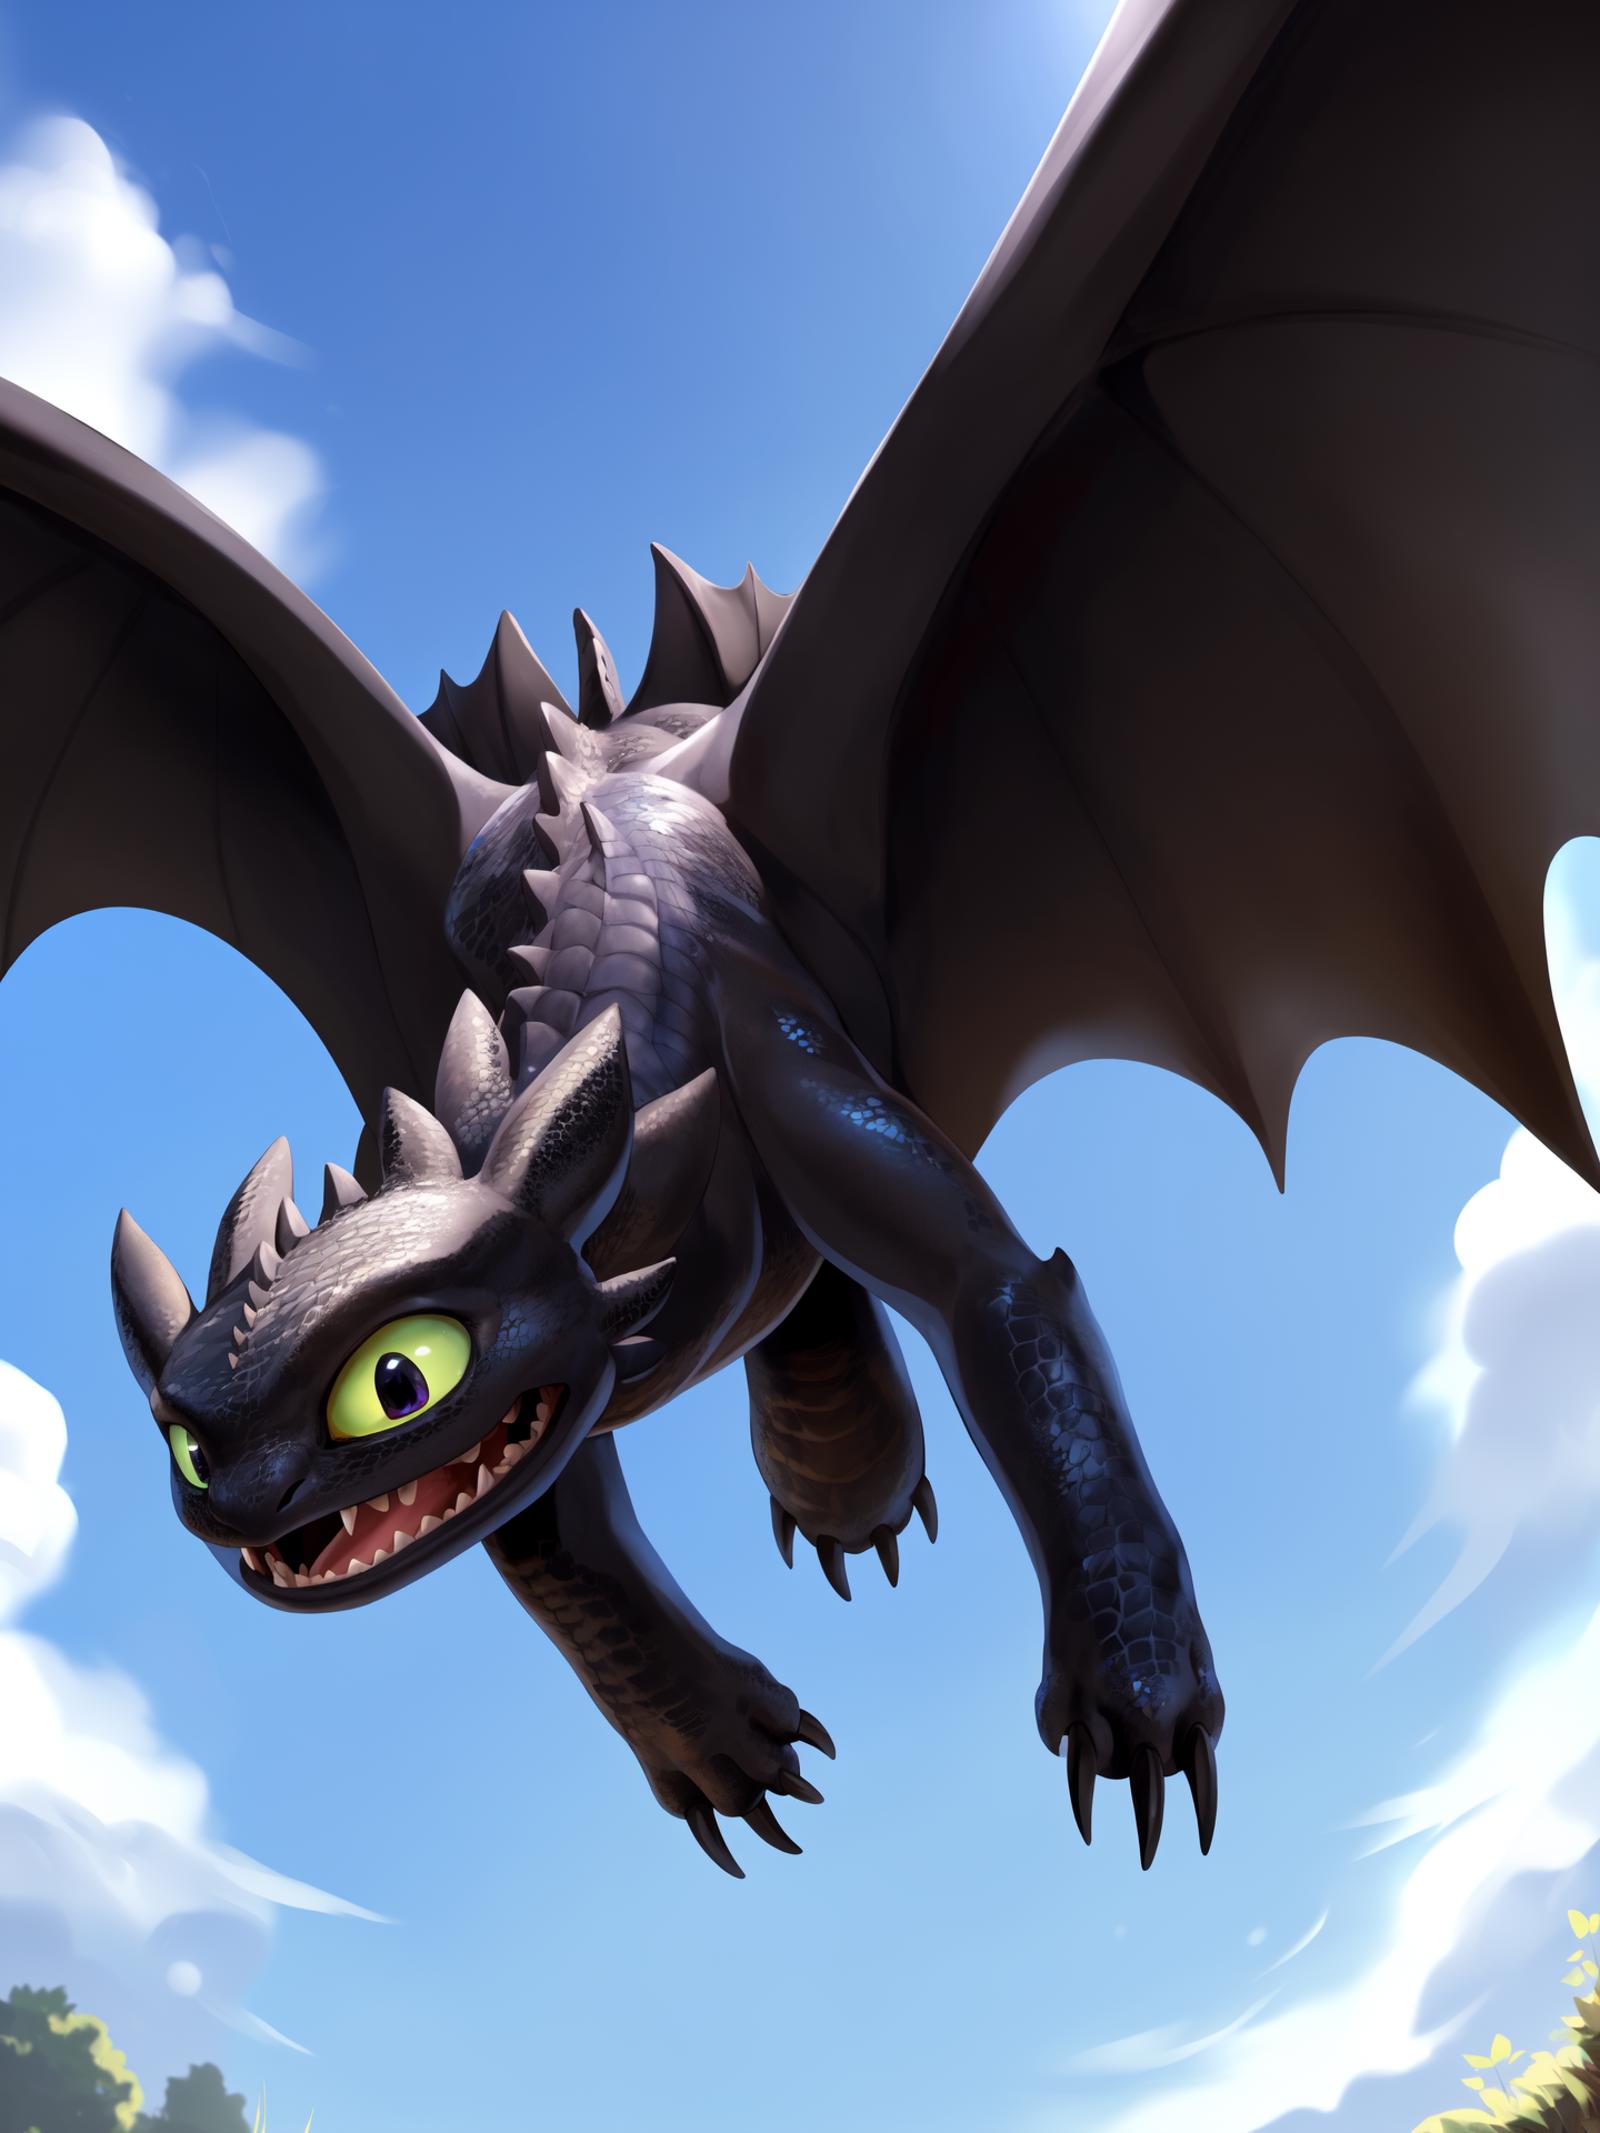 Toothless (HTTYD) image by Cynfall